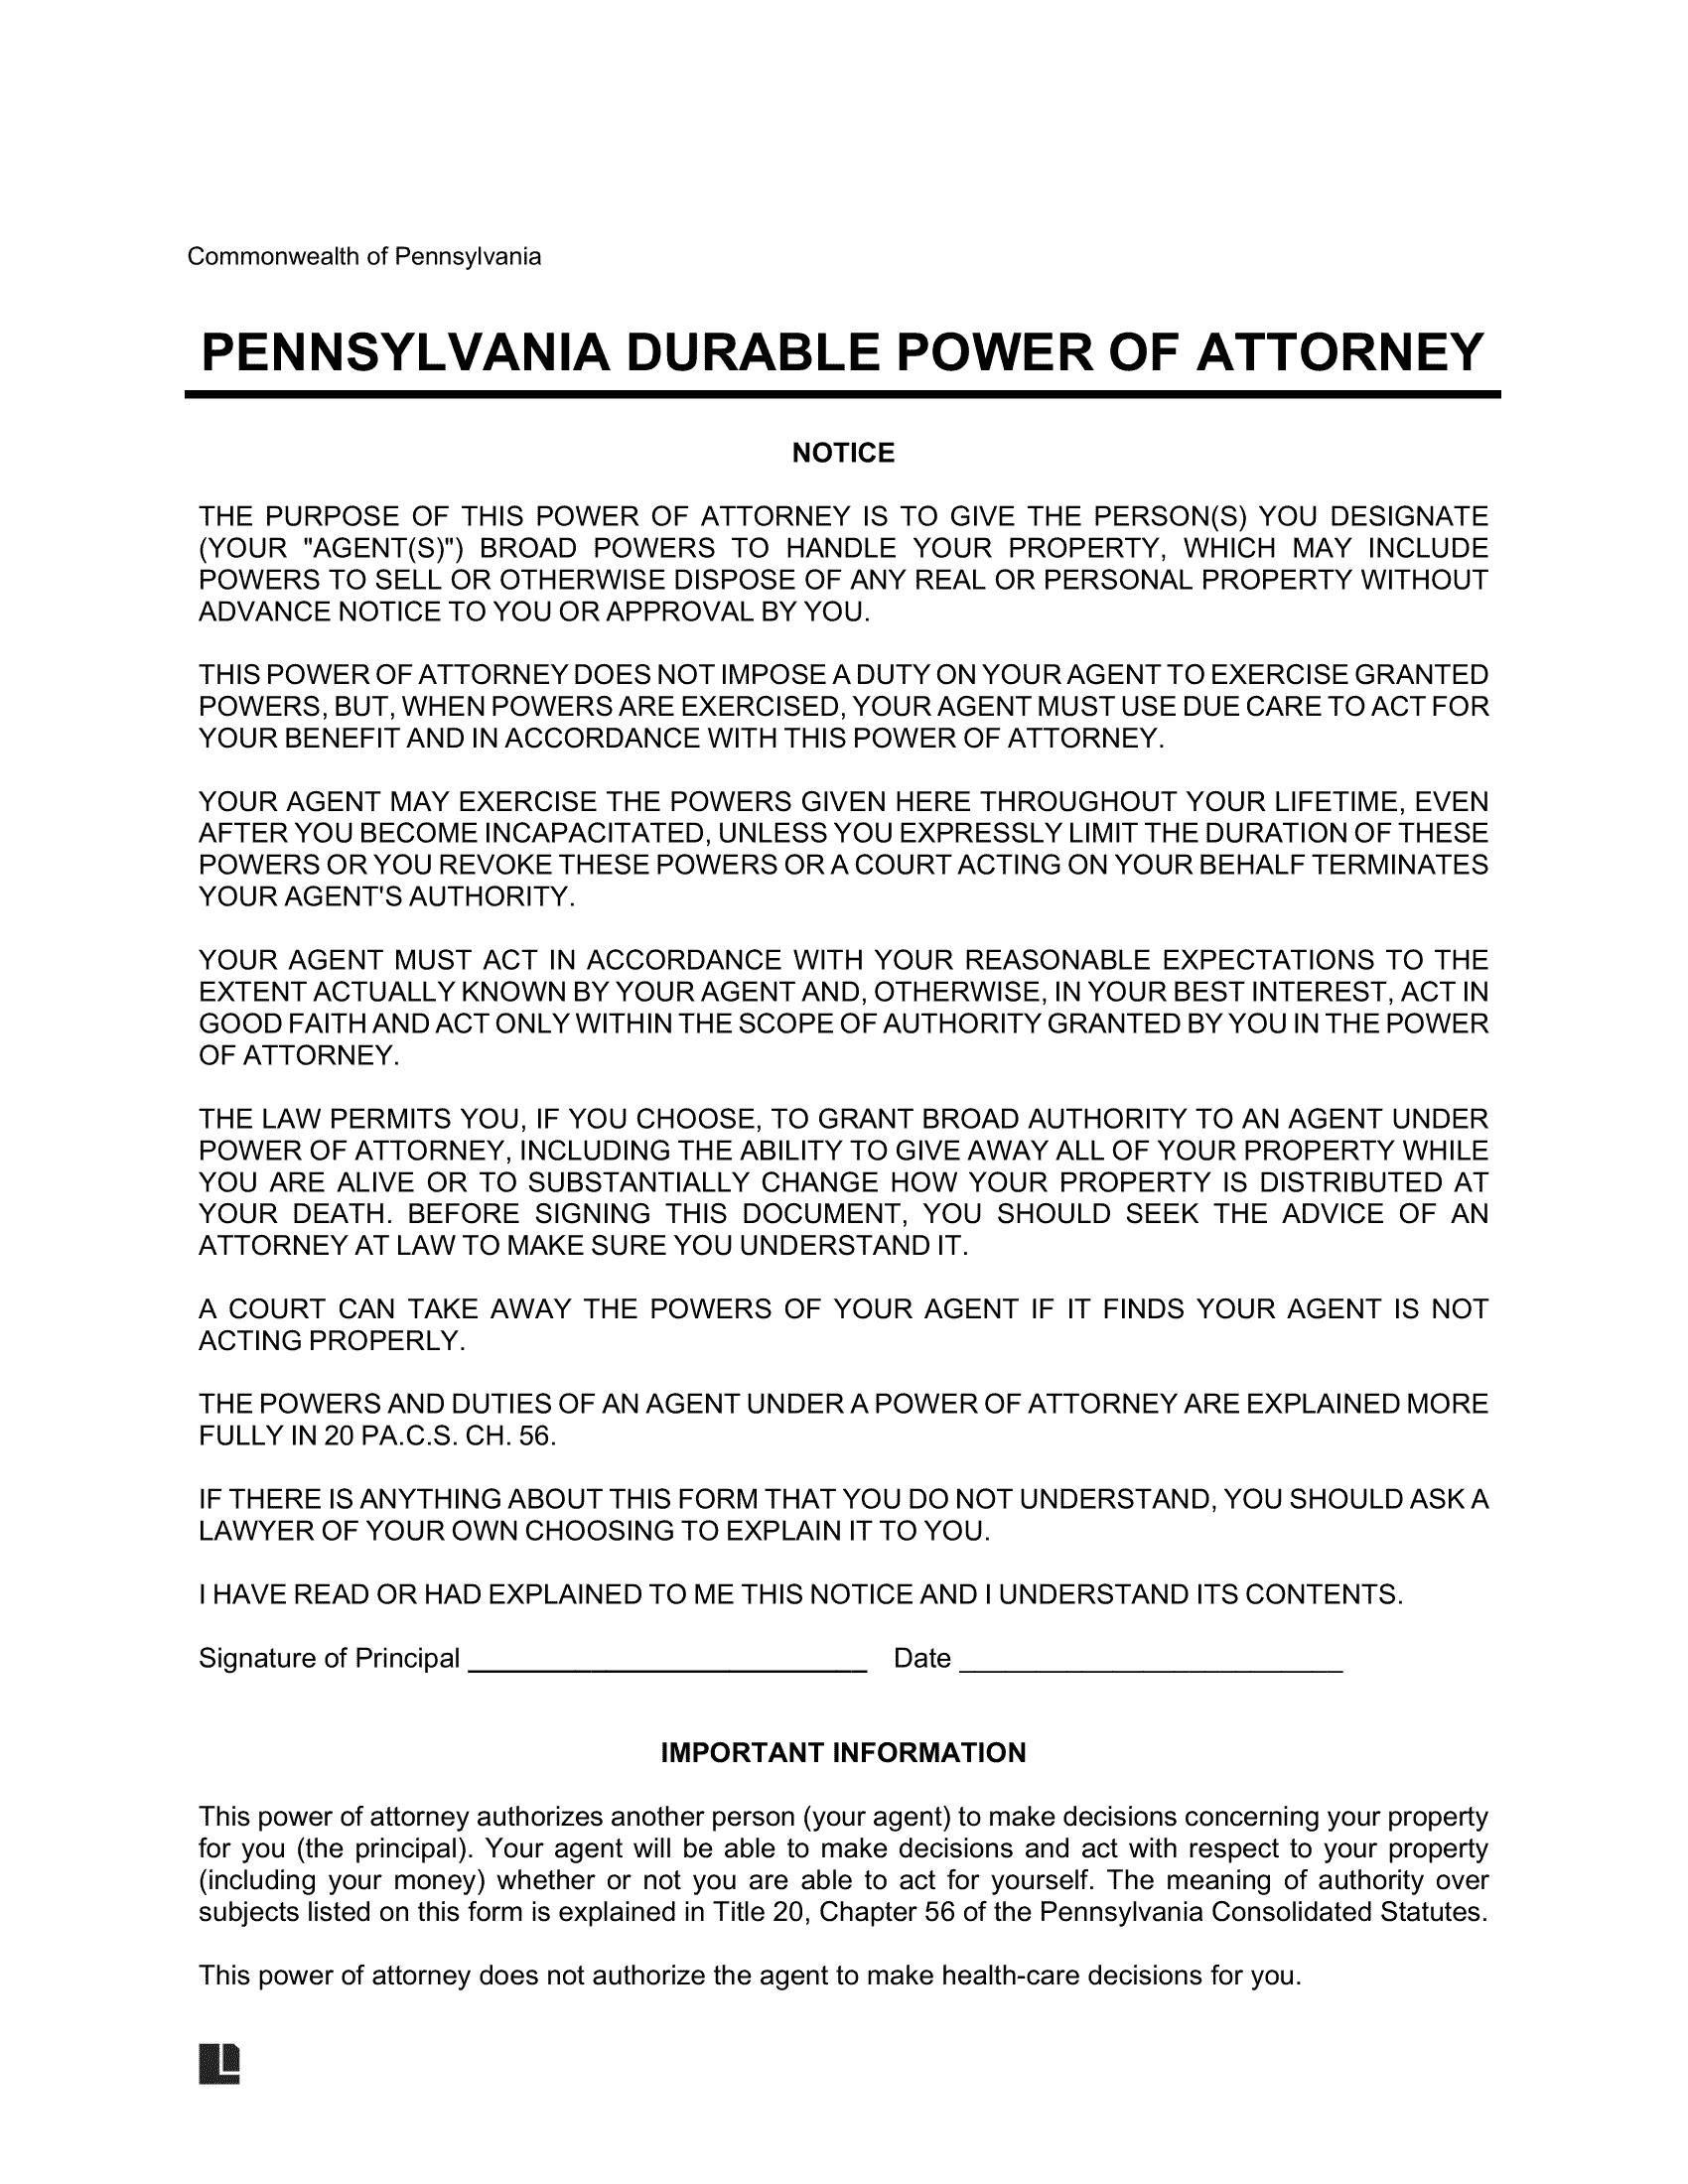 Pennsylvania Durable Power of Attorney Form